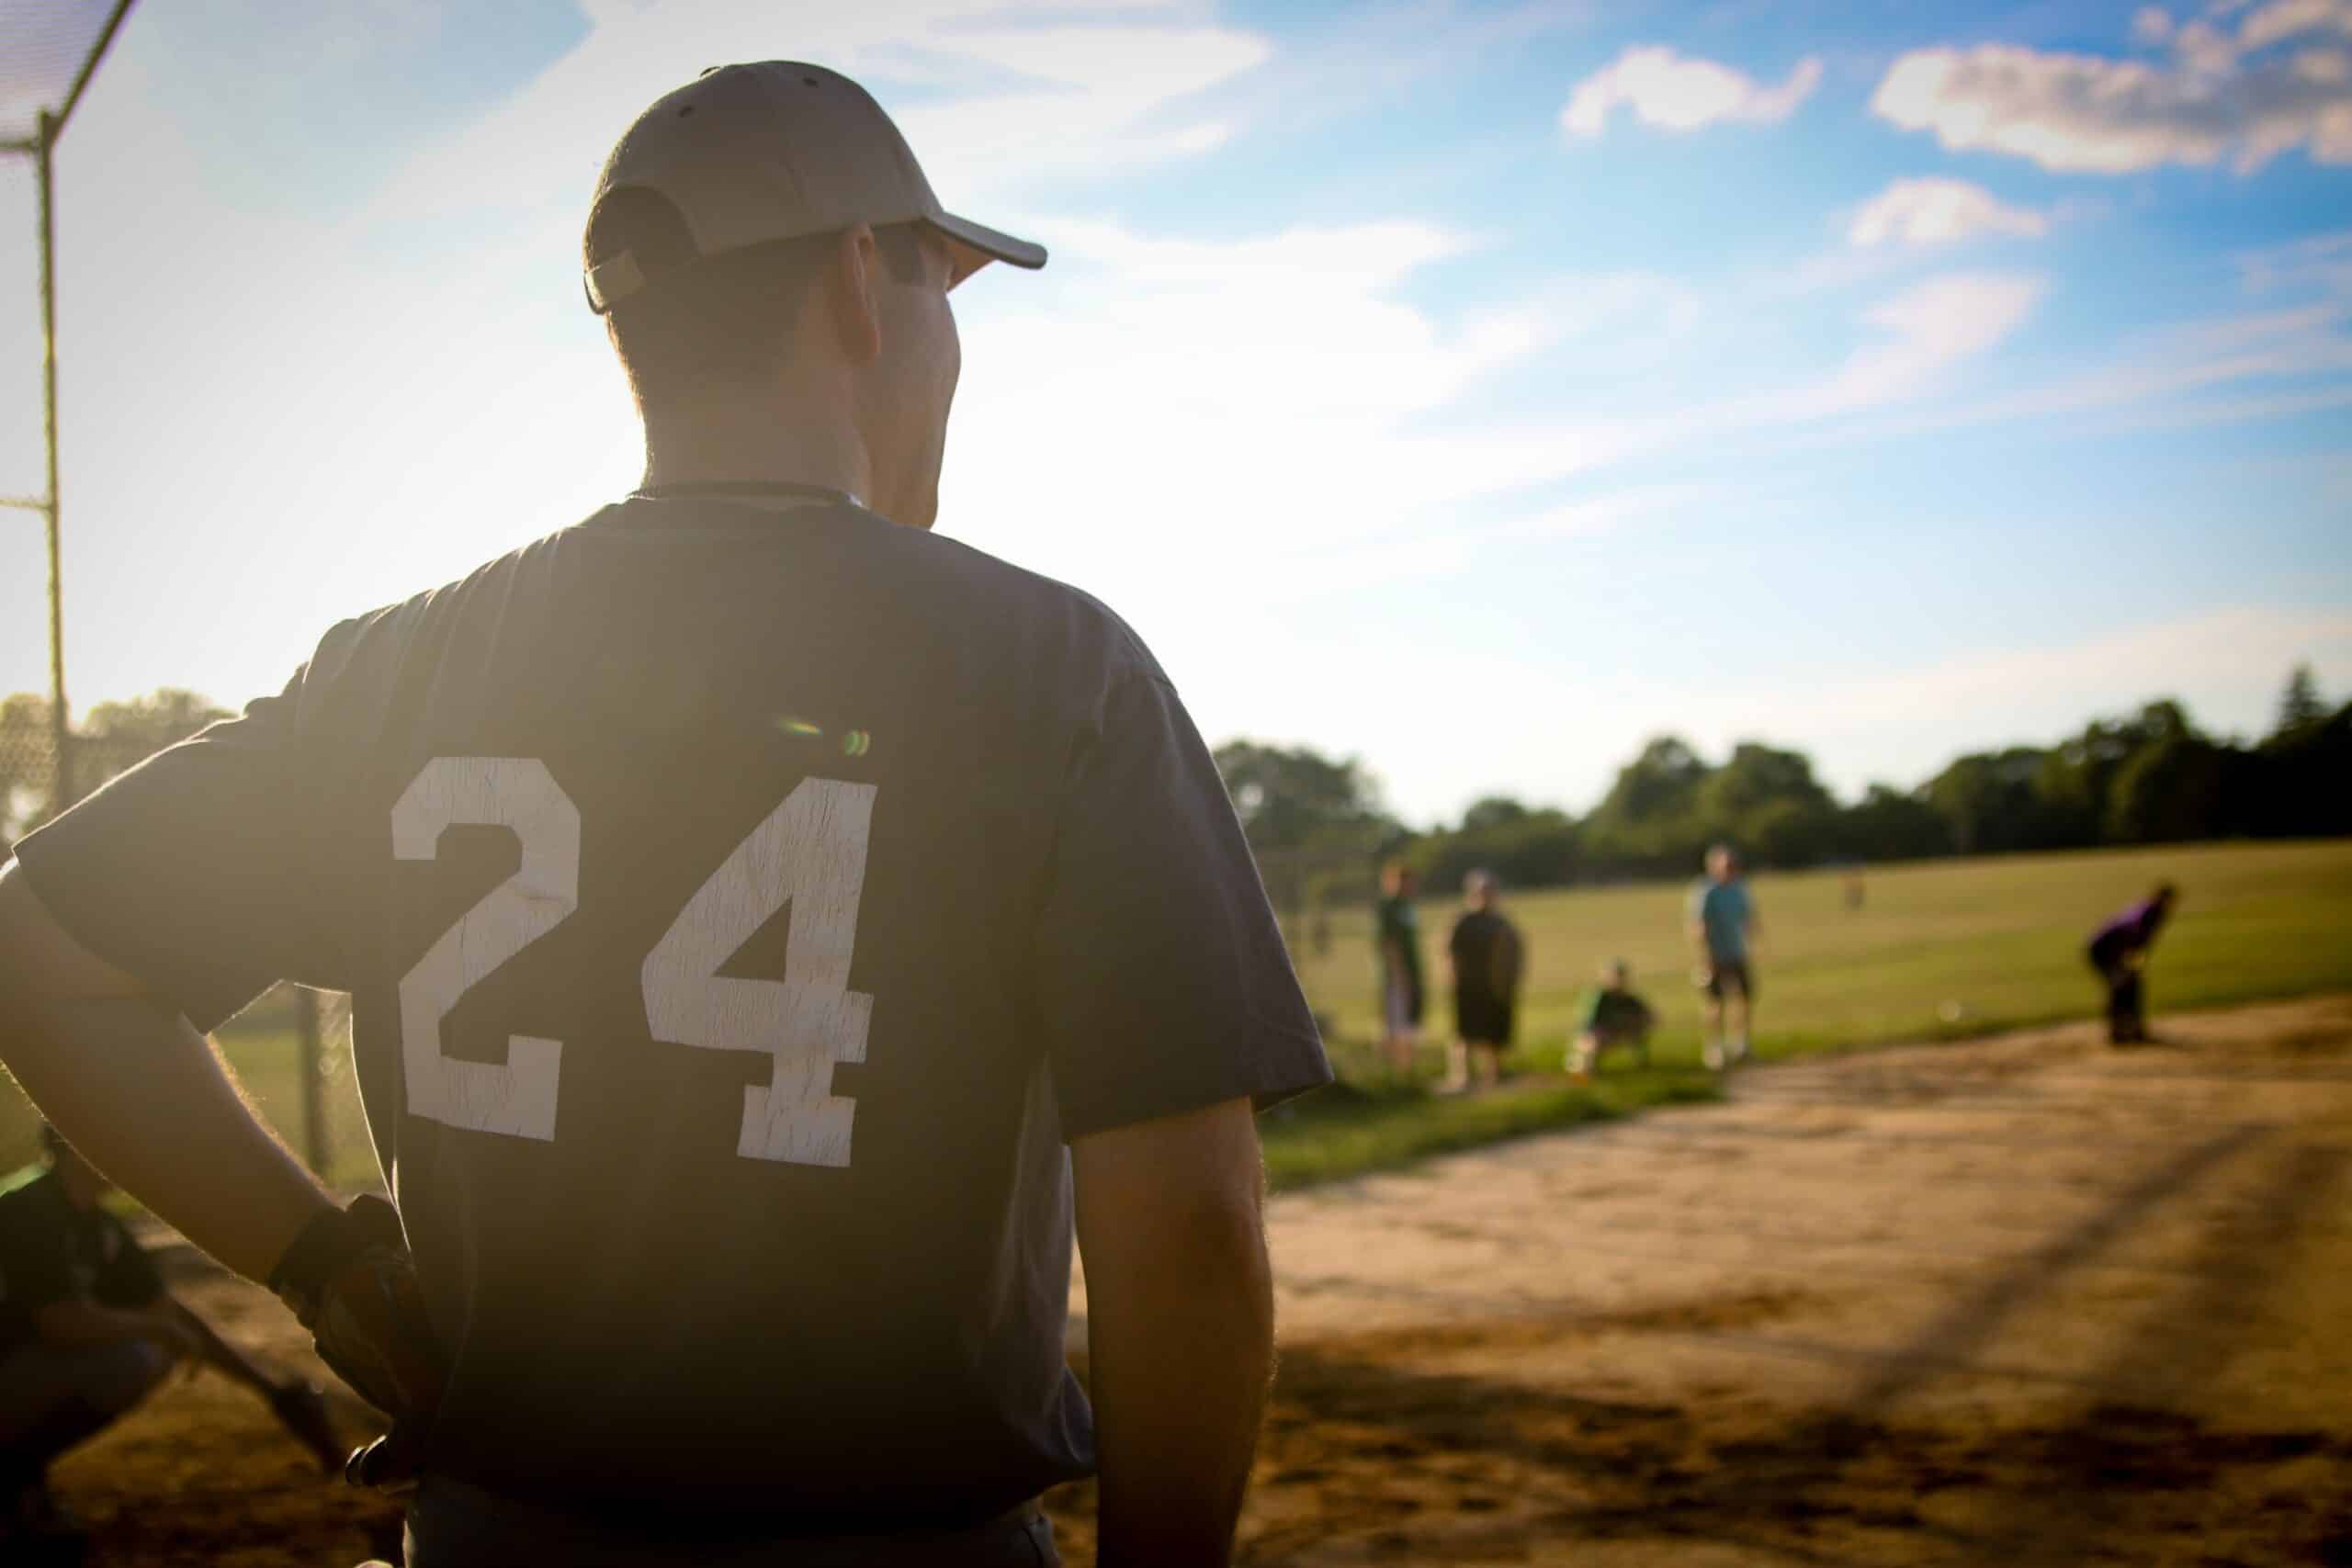 Man in baseball jersey and hat on a baseball field.